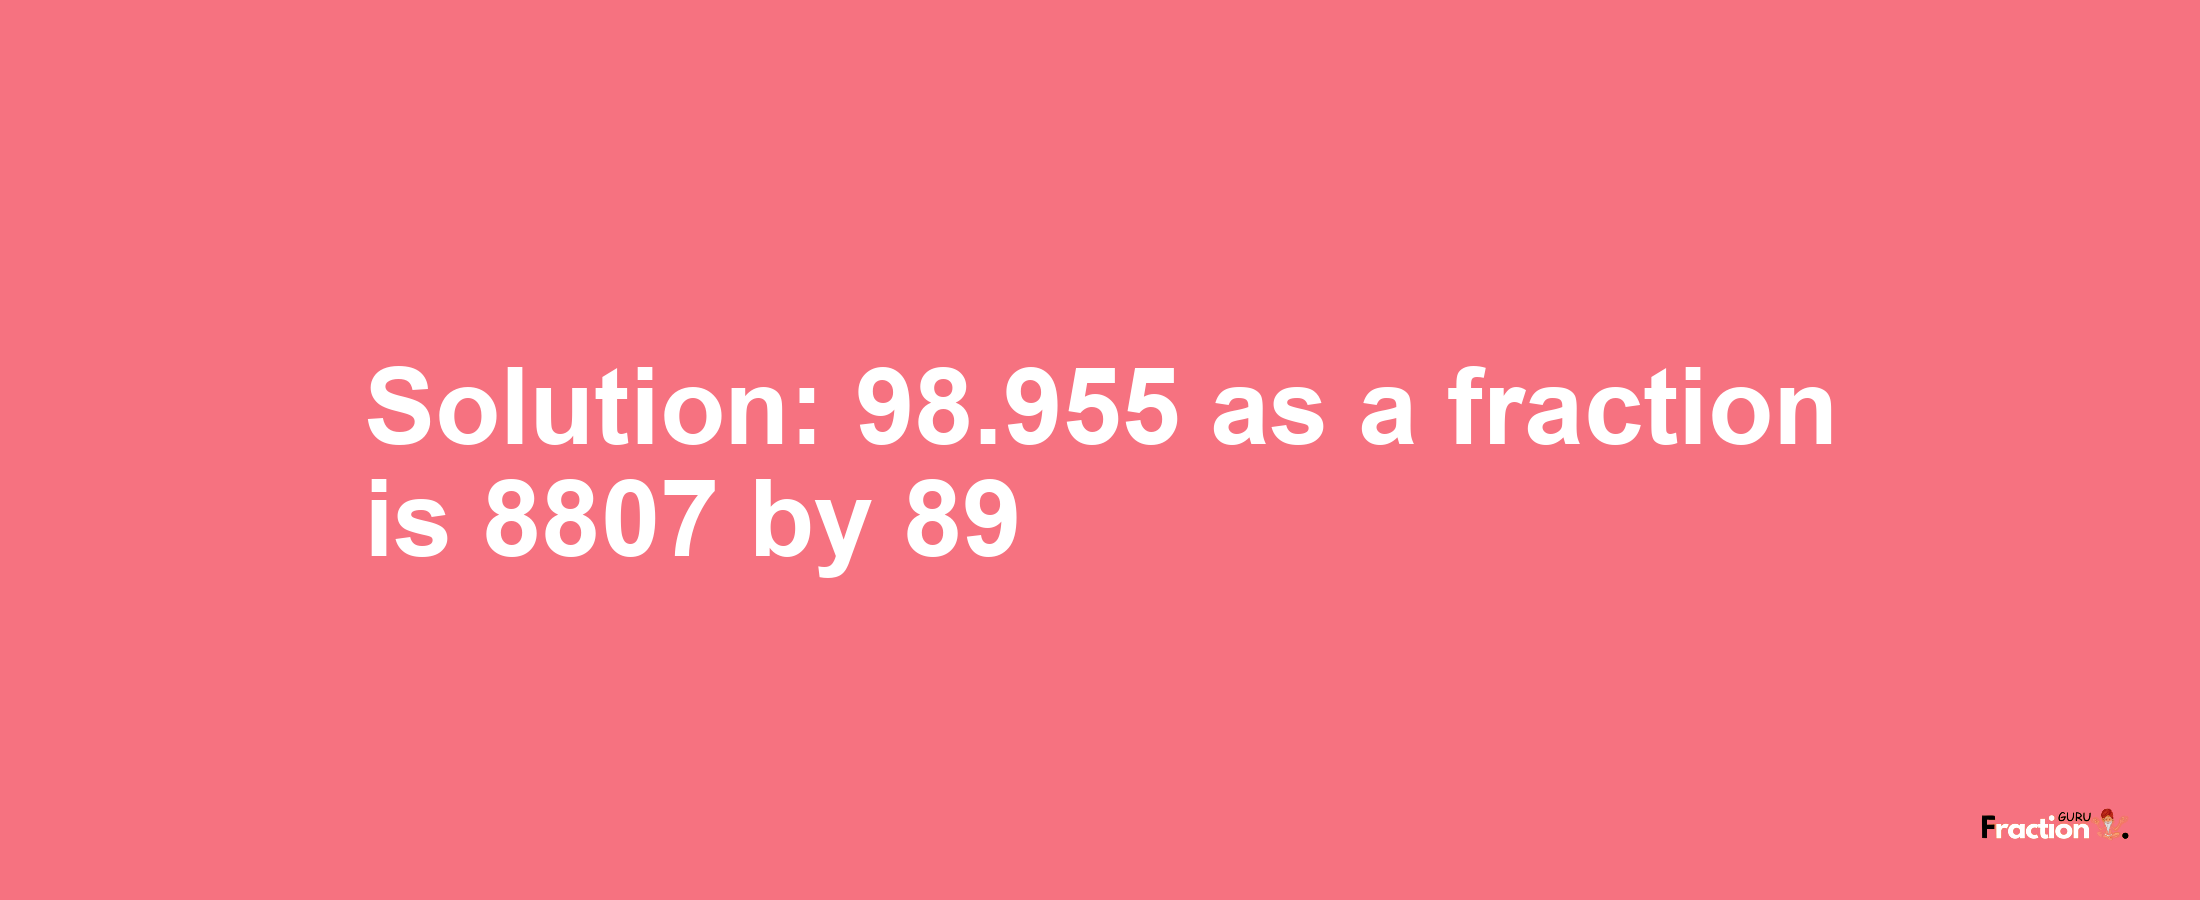 Solution:98.955 as a fraction is 8807/89